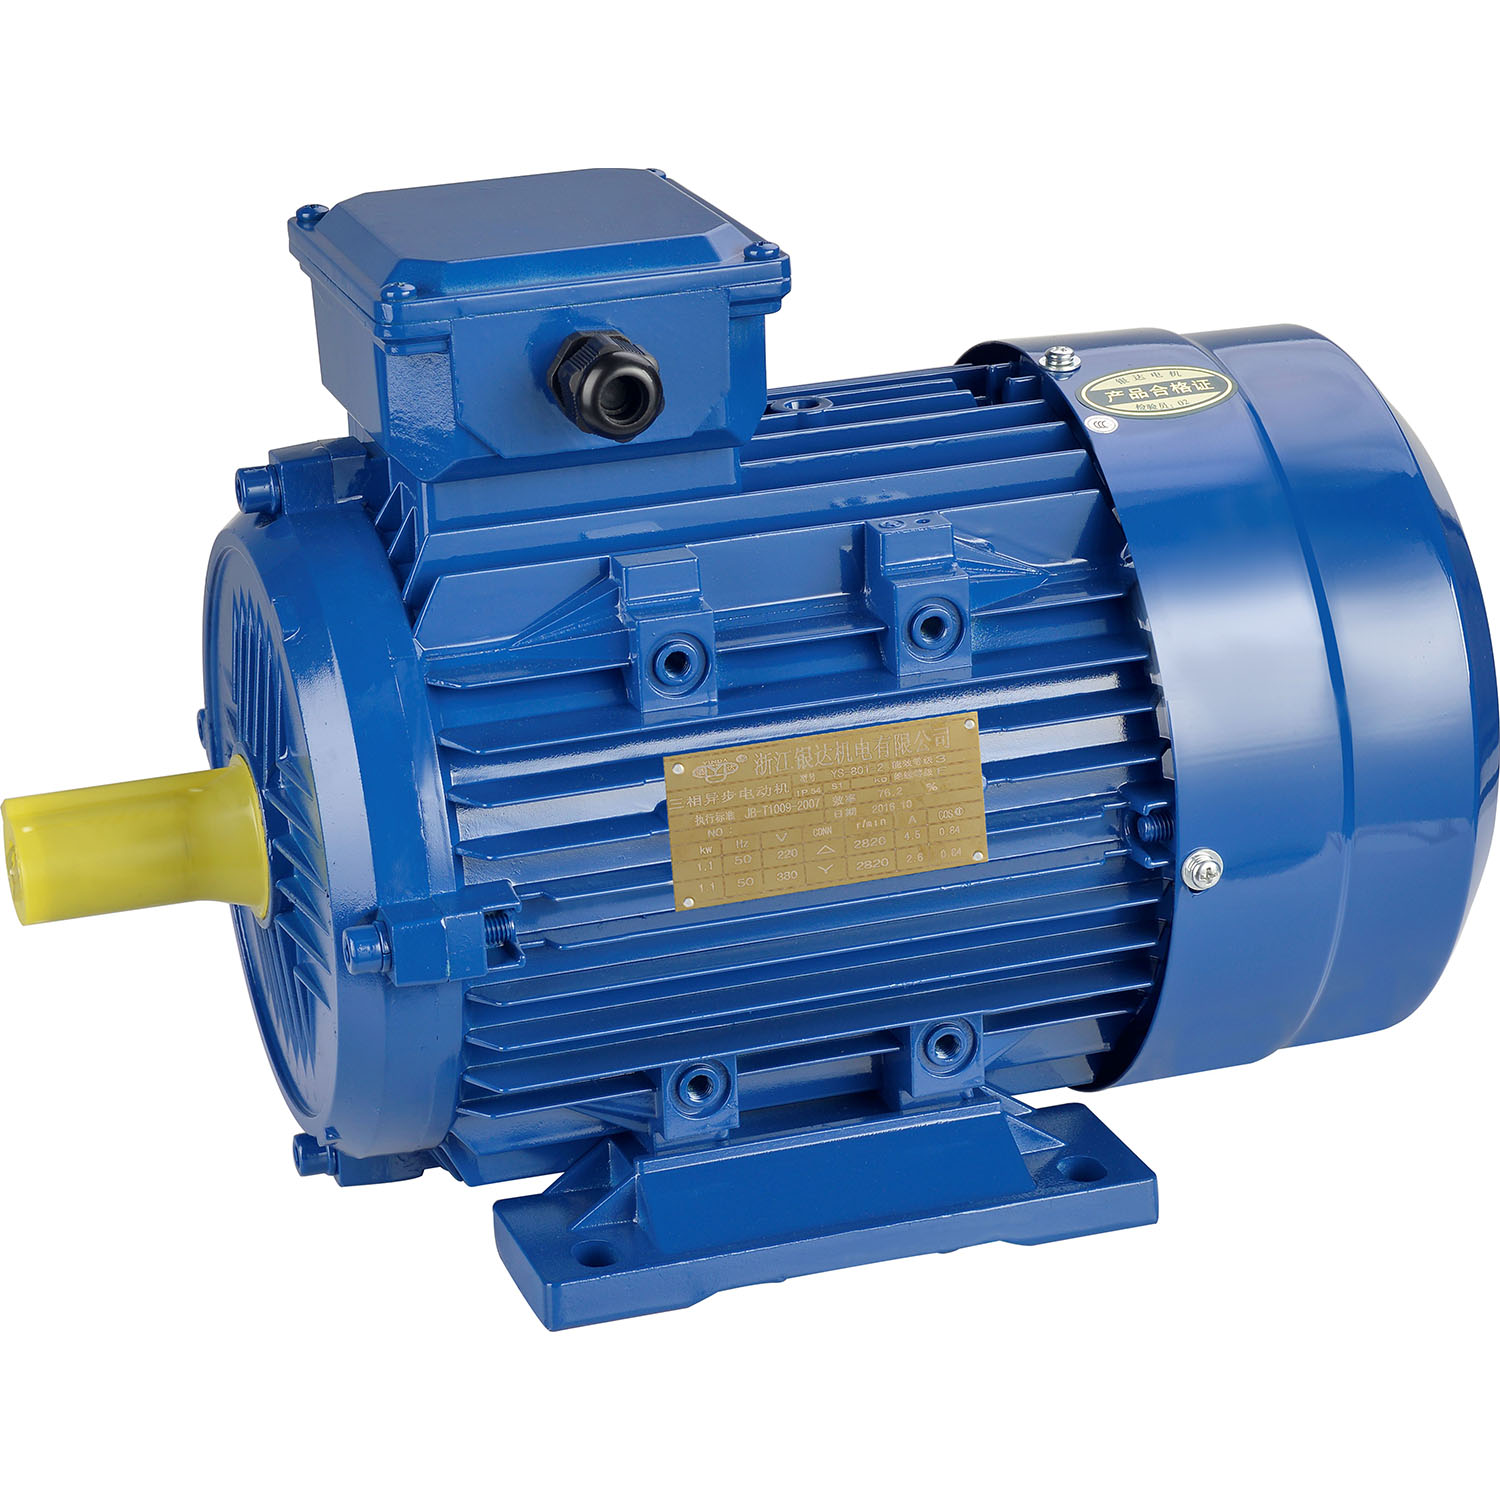 YX3-100L-6 1.5KW 2.0HP aluminum cylinder series high efficiency three-phase asynchronous motor